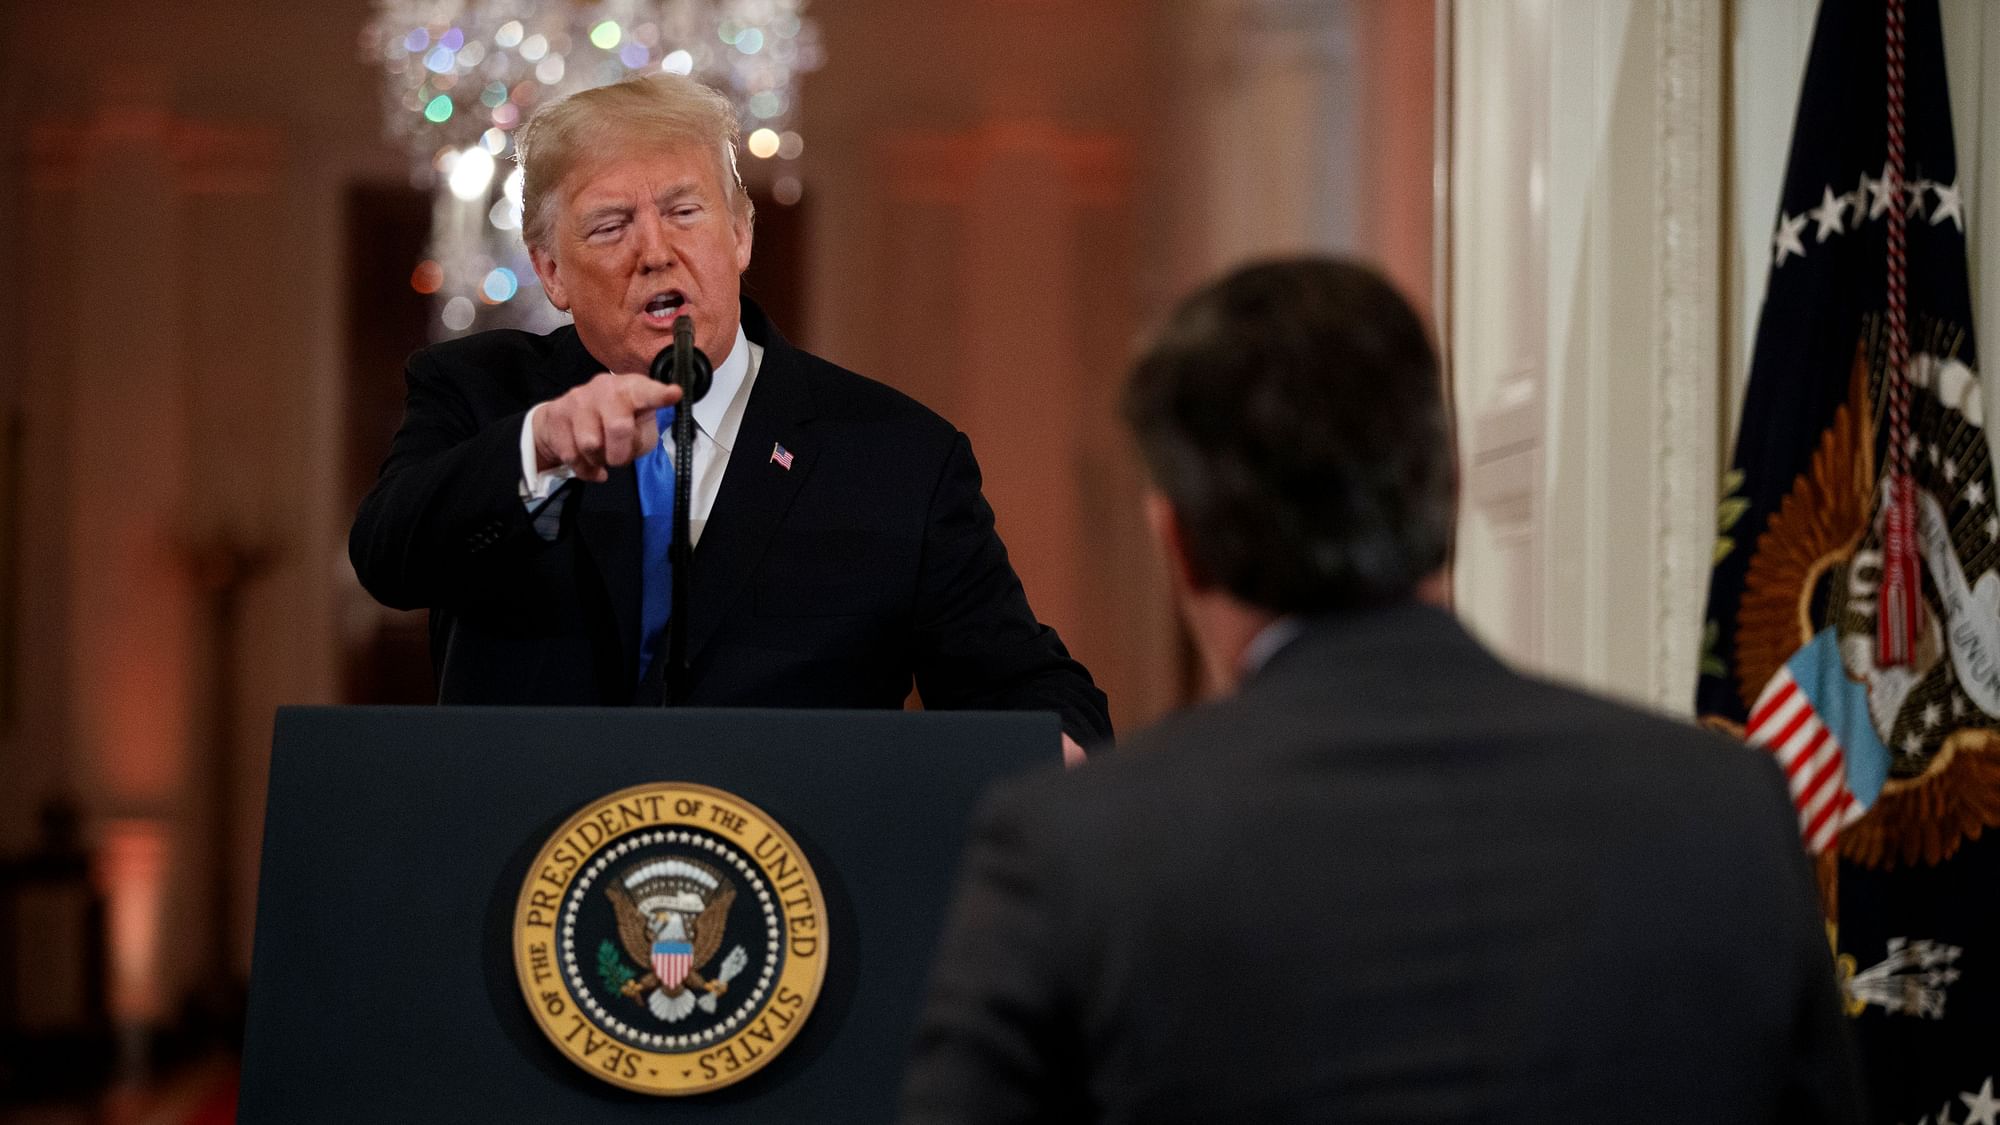 President Donald Trump speaks to CNN journalist Jim Acosta during a news conference in the East Room of the White House, Wednesday, 7 November 2018, in Washington.